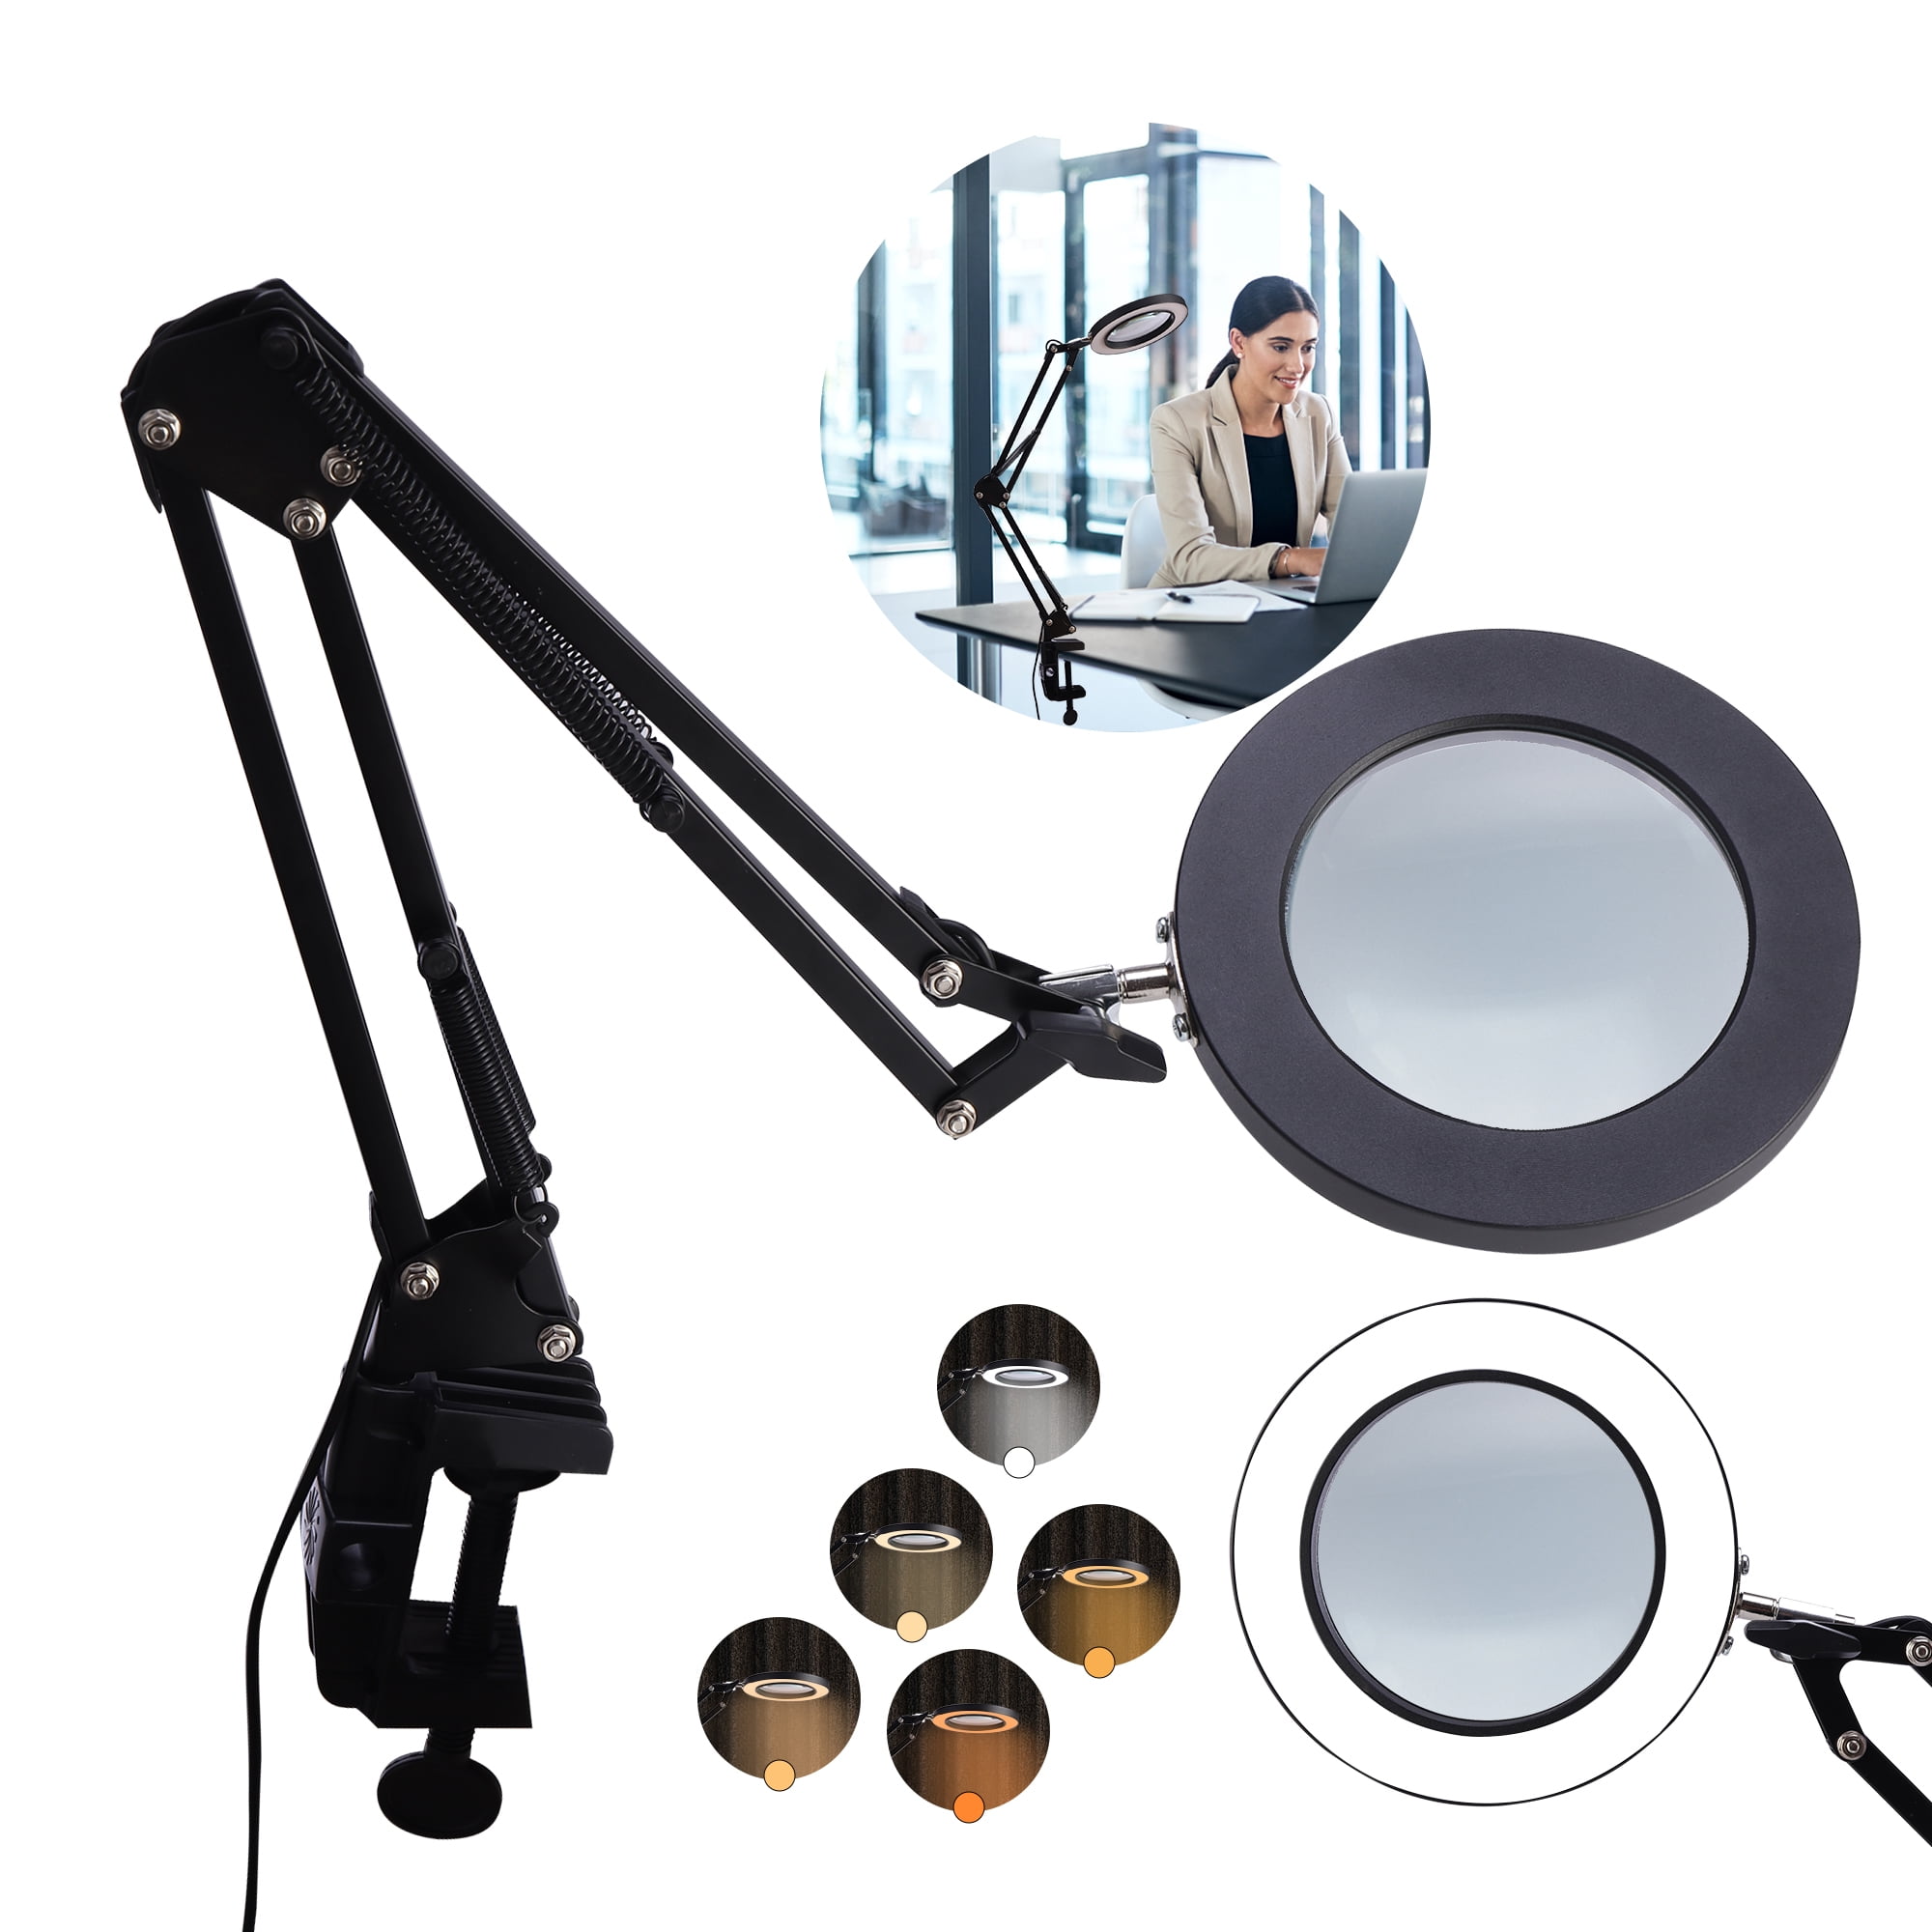 LED Magnifying Magnifier Glass with Light on Stand Clamp Arm Hands